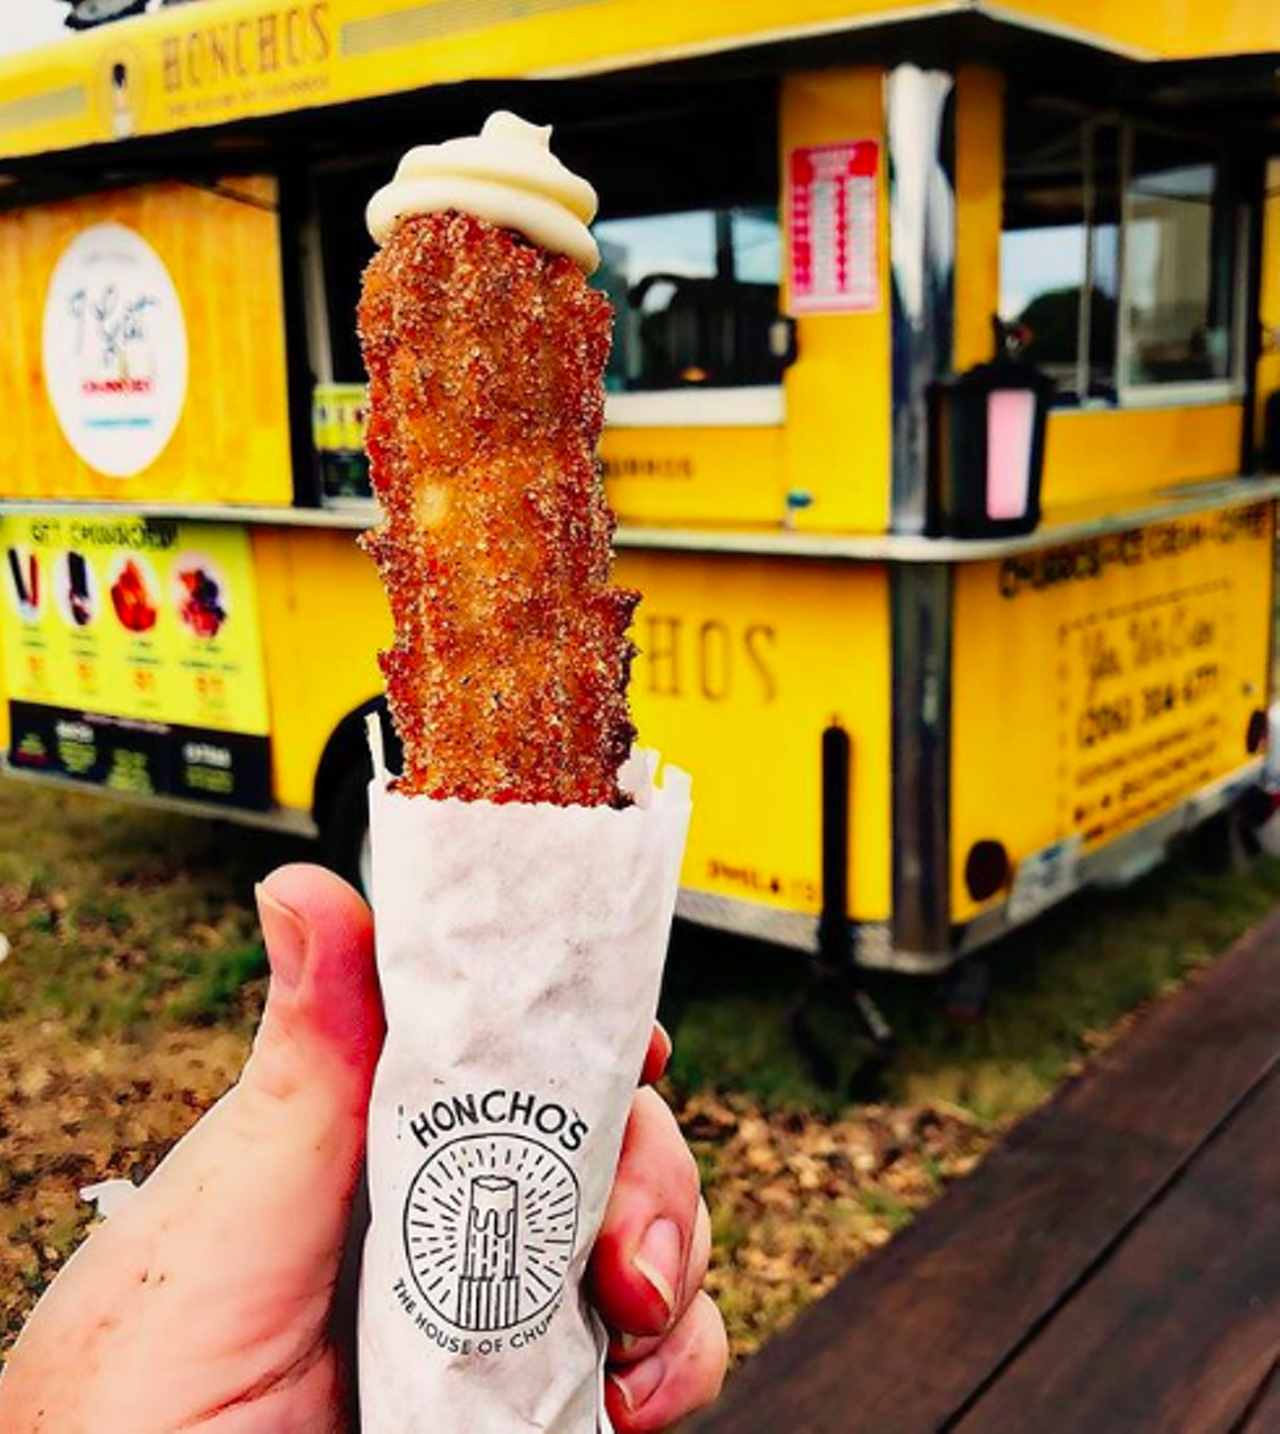 Honchos House of Churros
8190 Seguin Road, Converse, facebook.com
Honchos added a second trailer out in Converse. The space is equipped with the same menu as the Babcock/Huebner location, as well as a playground area, picnic chairs and tents.
Photo via Instagram / gohonchos